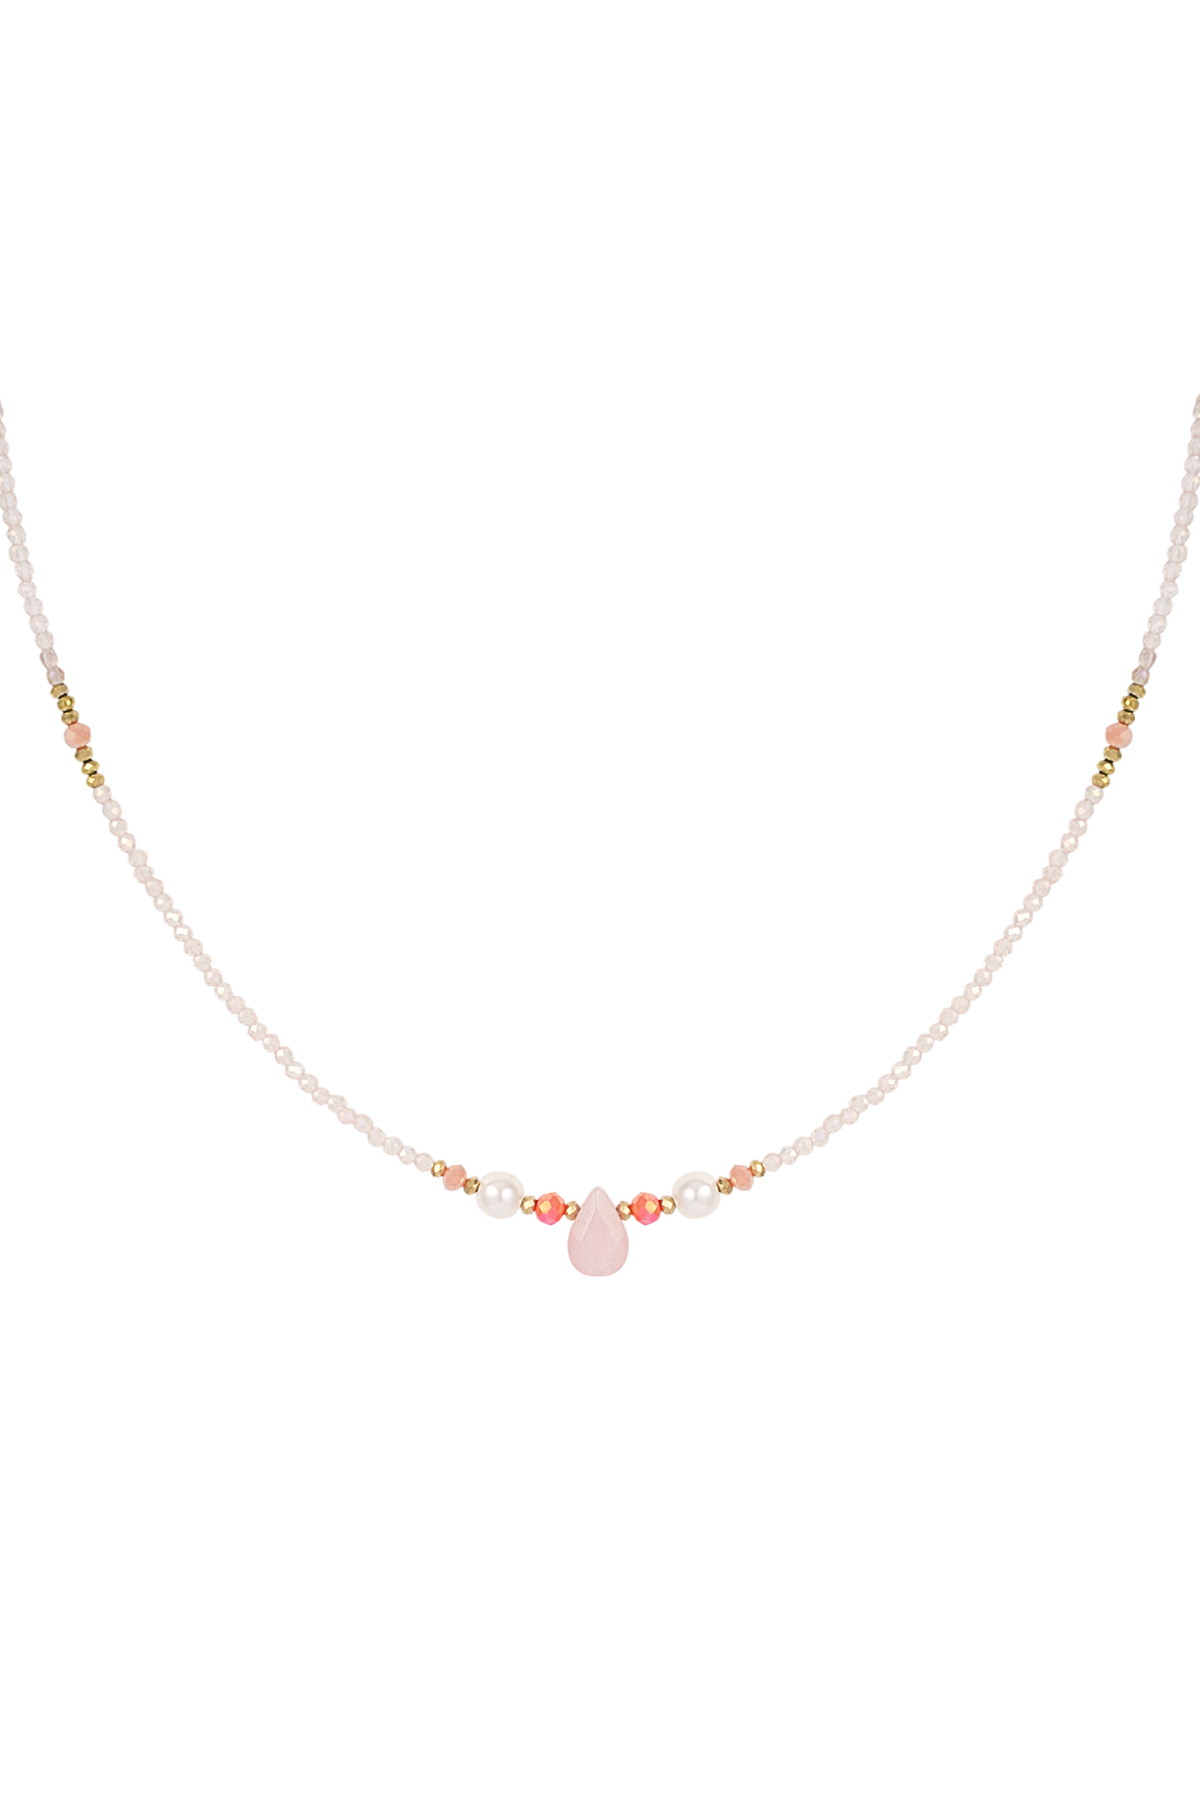 Thin beaded necklace with drop - pink / gold